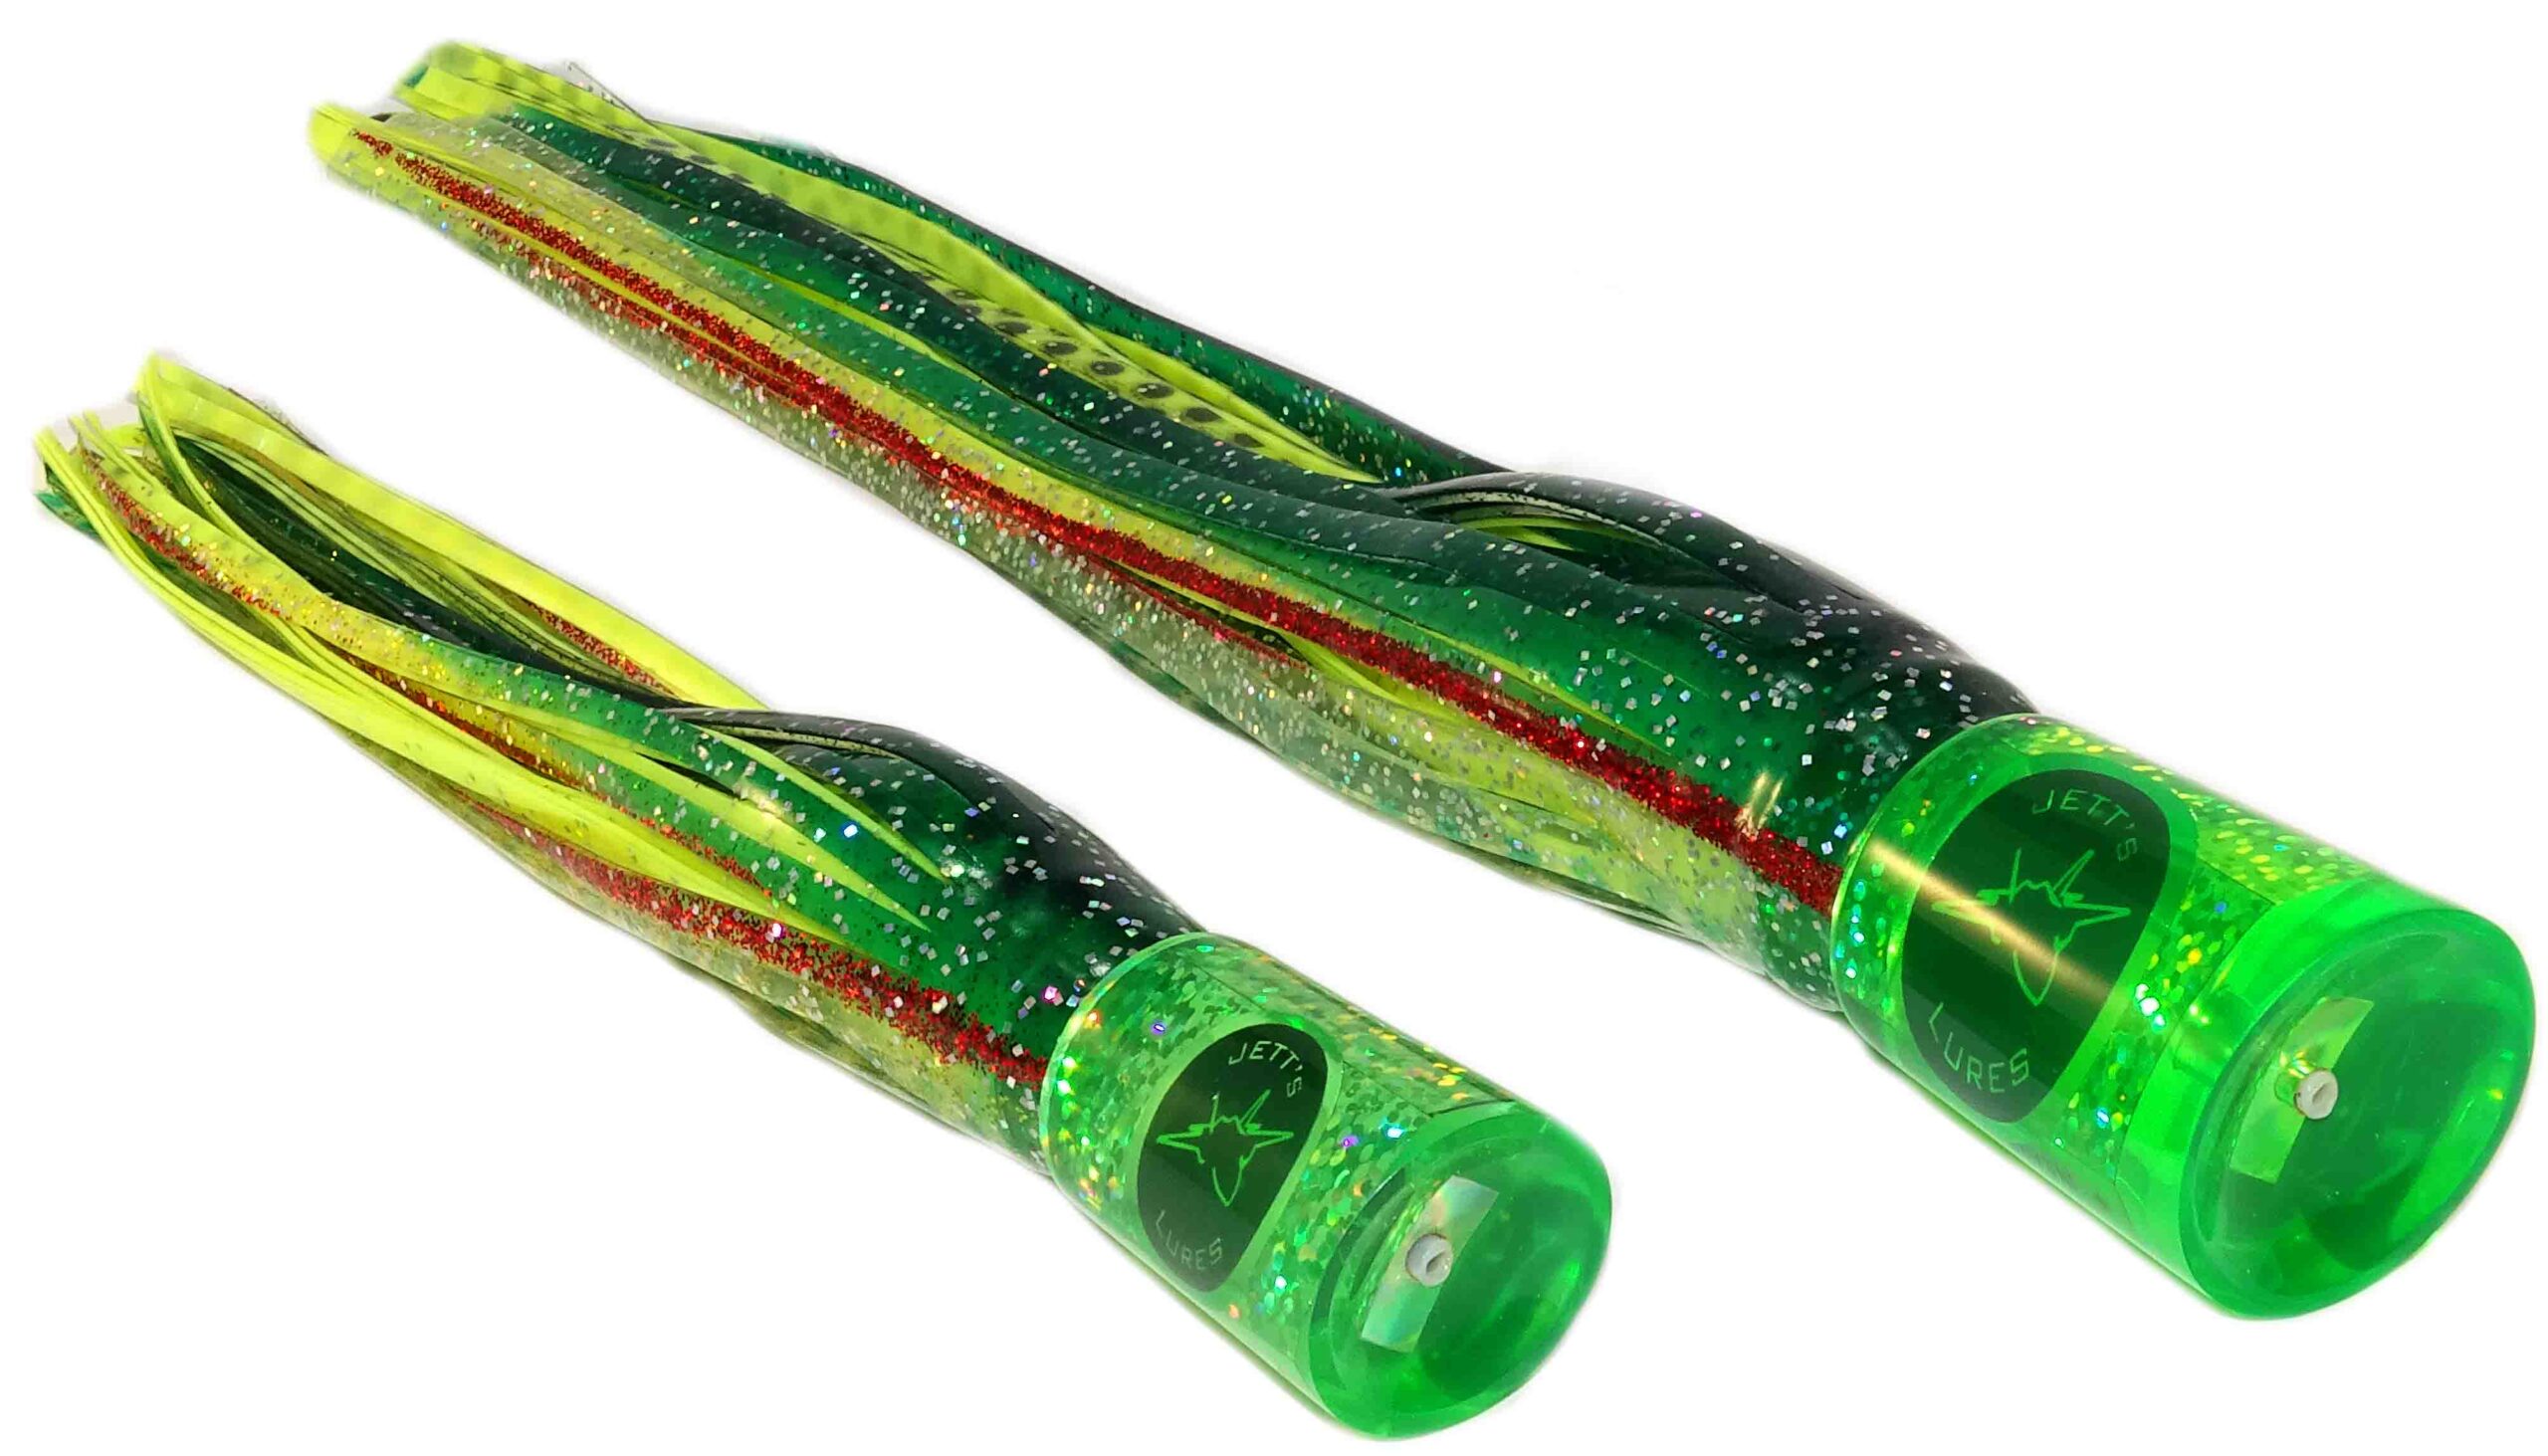 Jetts Lures - Insane Series - Collection